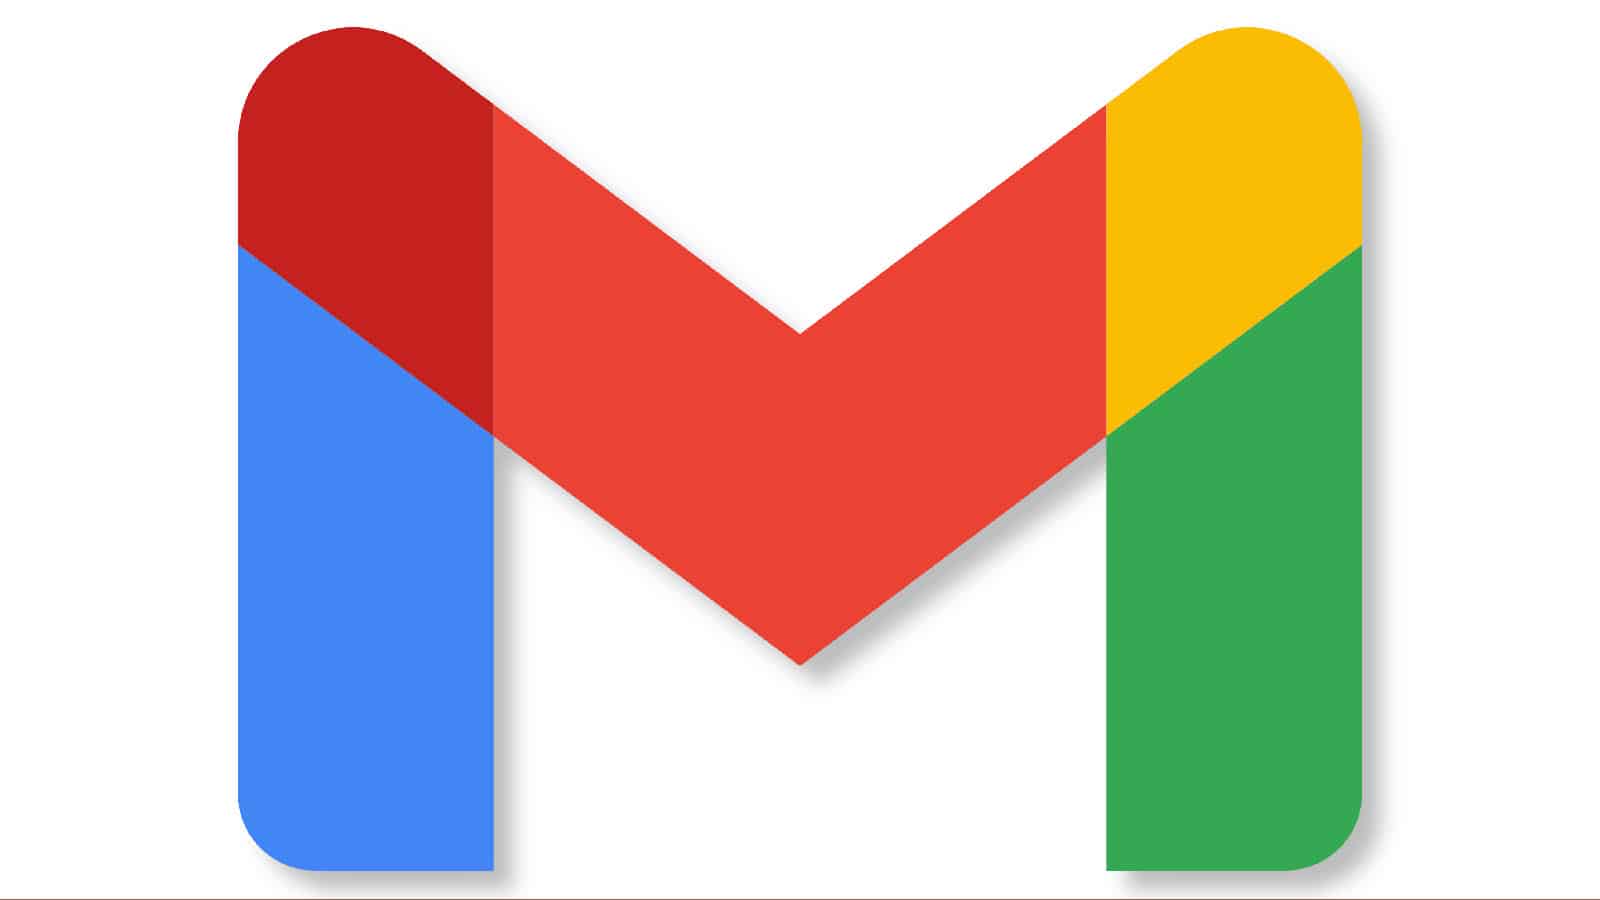 Featured image for The search bar in Gmail gets bigger complying with M3 design